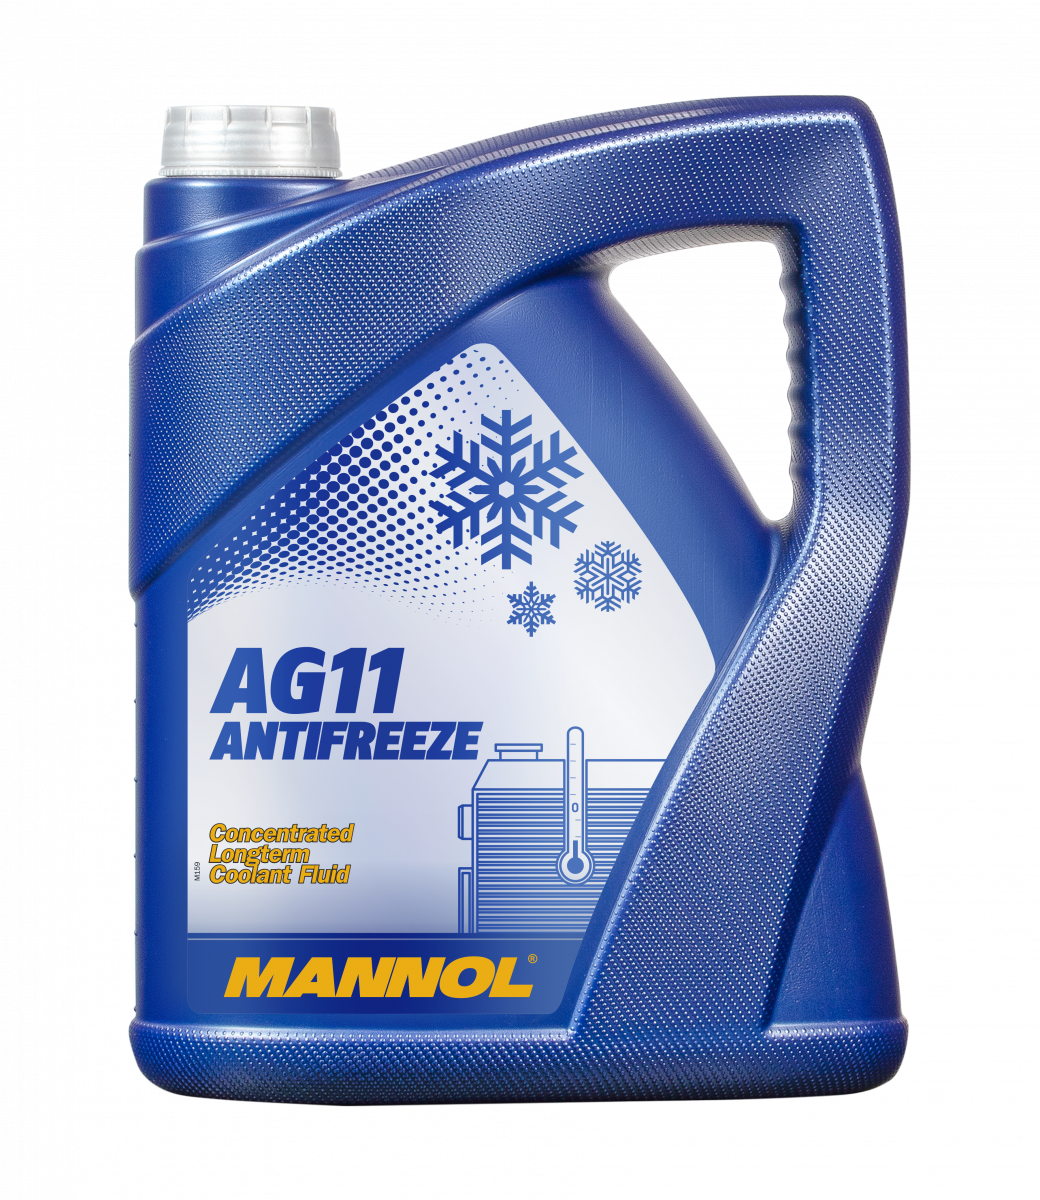 Mannol - 4111 Antifreeze AG11 Longterm (Concentrated)